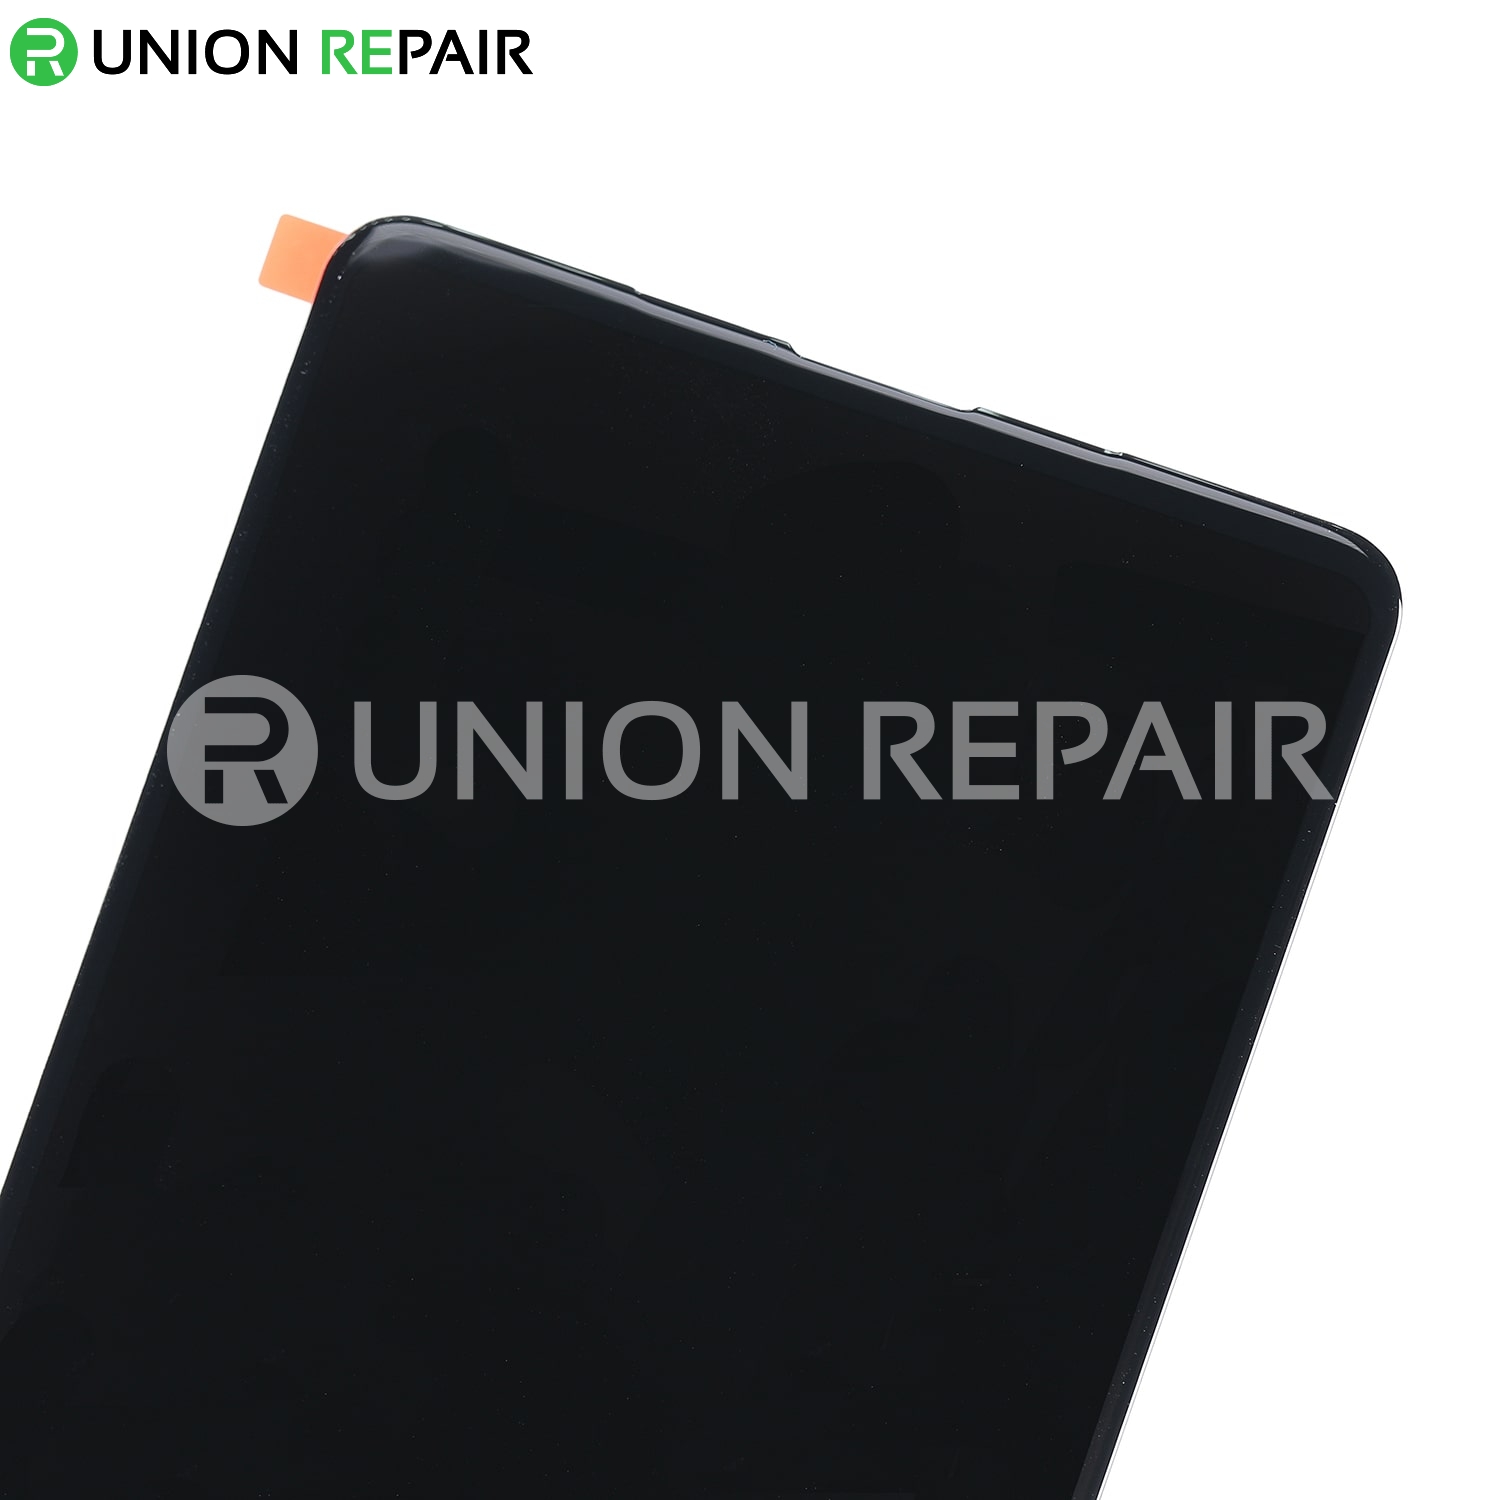  Replacement for XiaoMi MIX 2S LCD Screen Digitizer - Black, fig. 5 